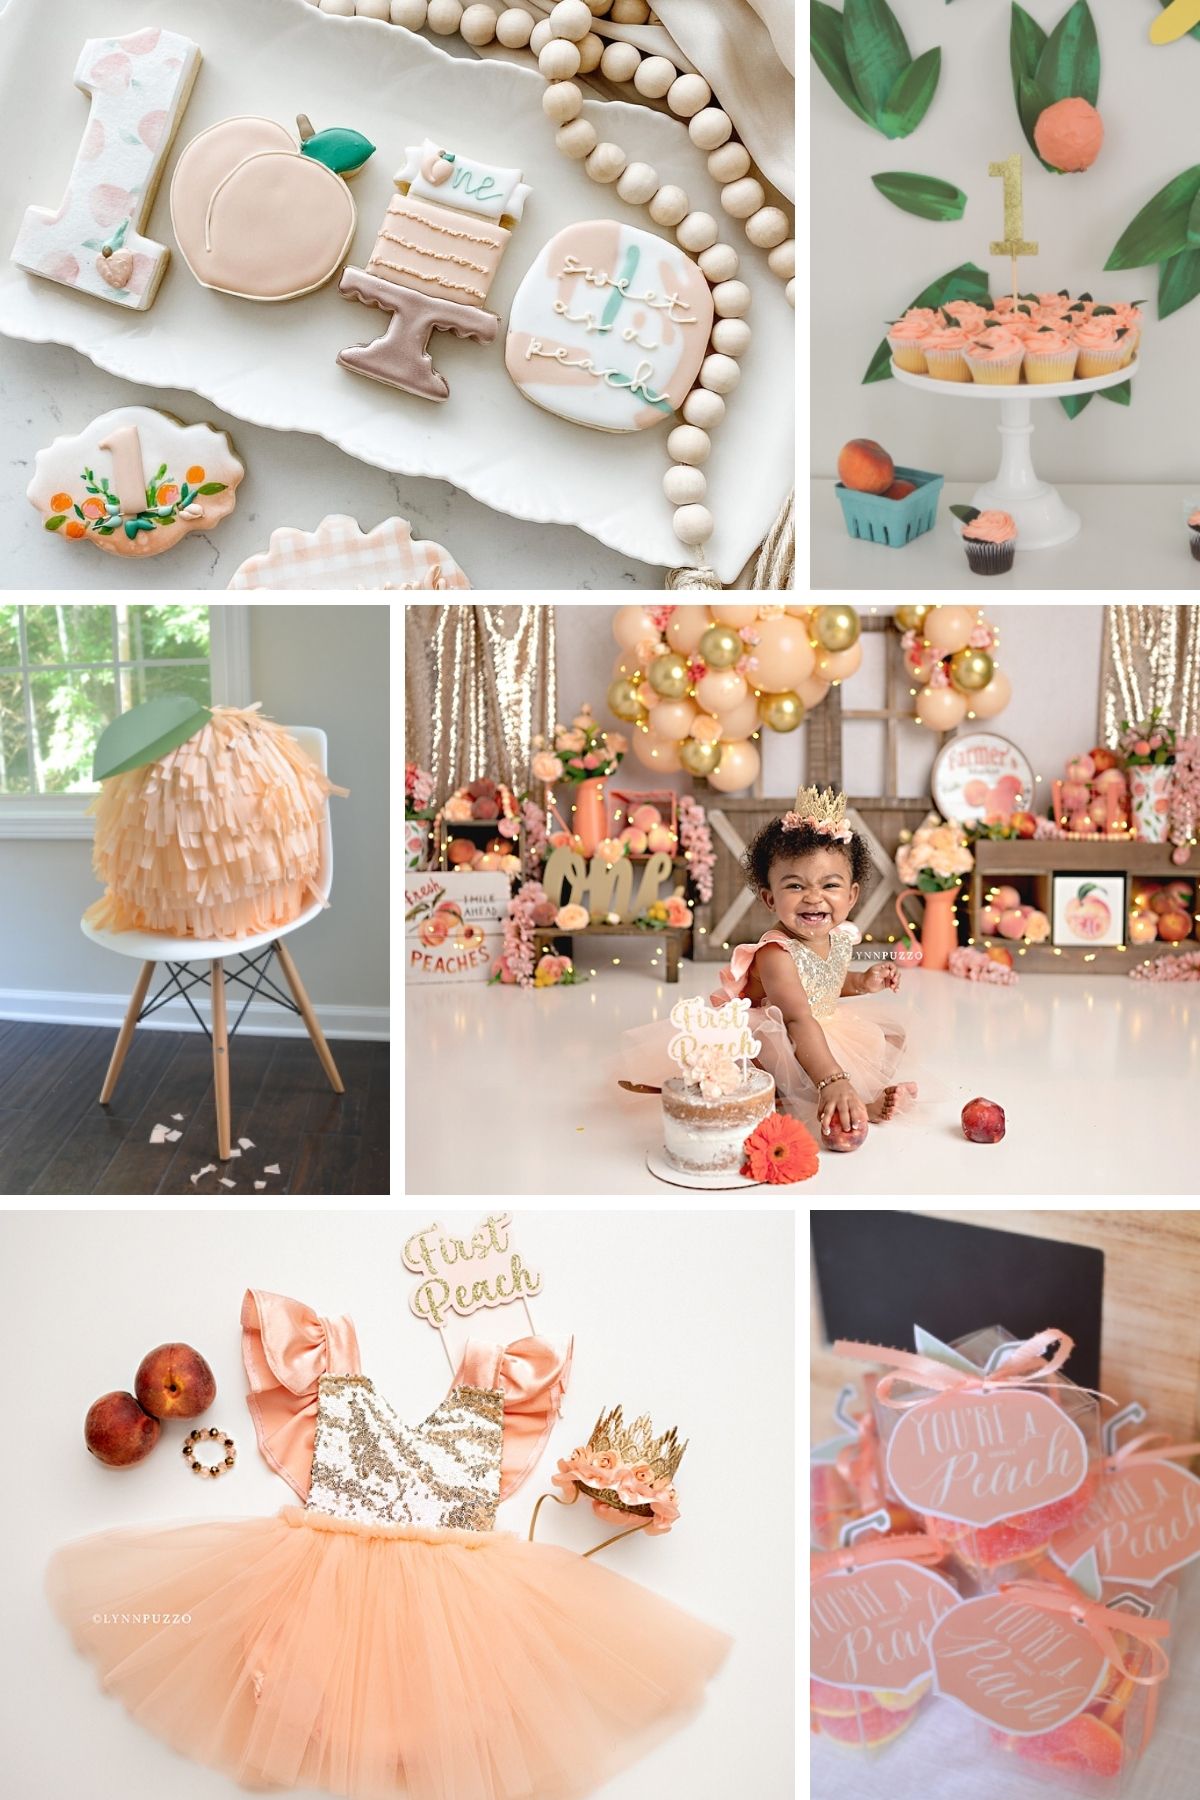 Photo collage from sweet peach party theme including a cake, cookies, and a tutu.